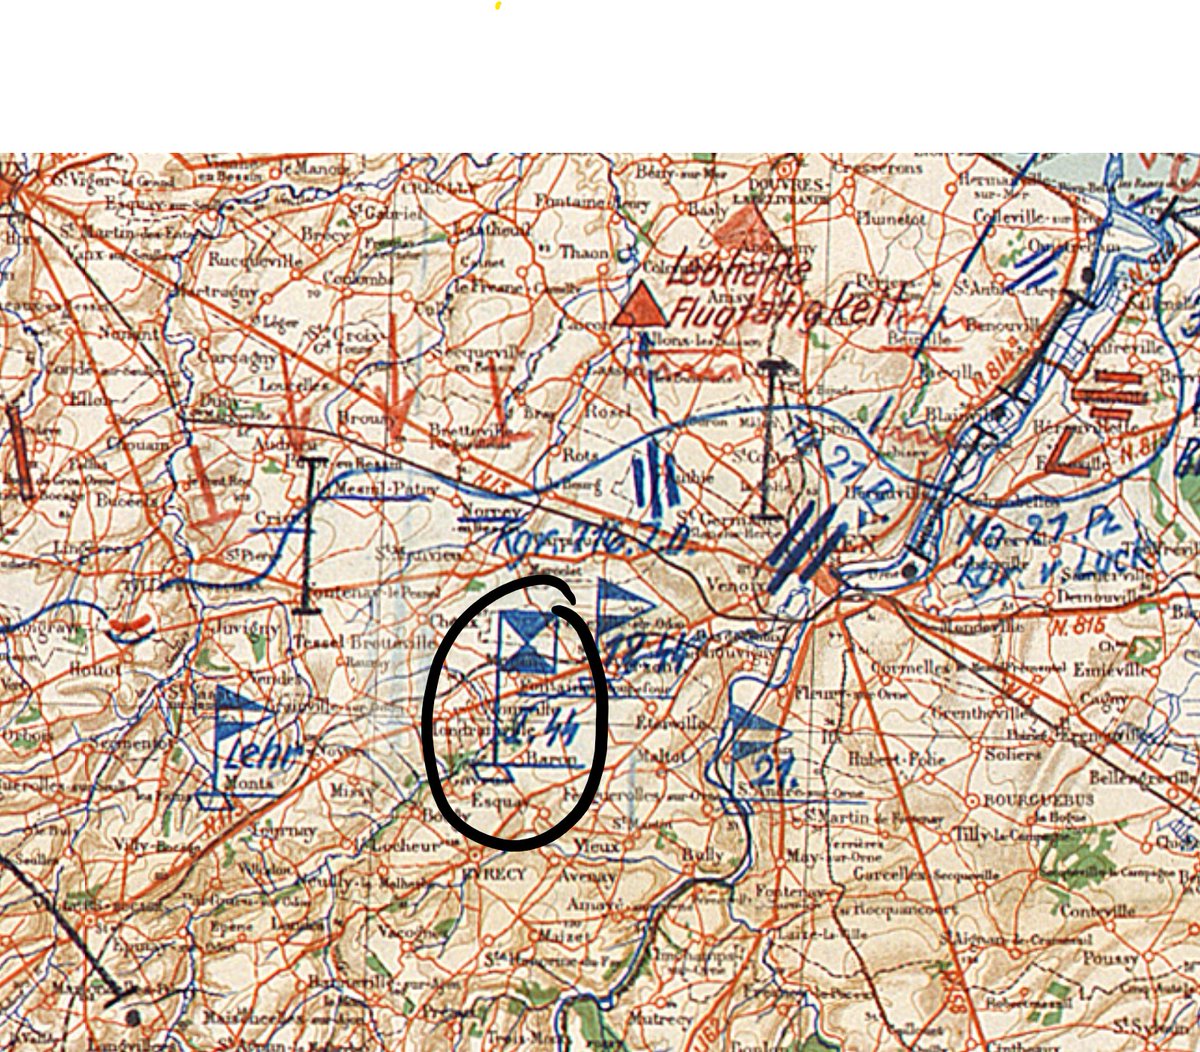 Nice gaff. Who lives in a place like this? Well, for a few weeks in June of 1944, it was the HQ of I.SS-Panzer-Korps. Here's an extract from a German situation map of today in 1944: /5